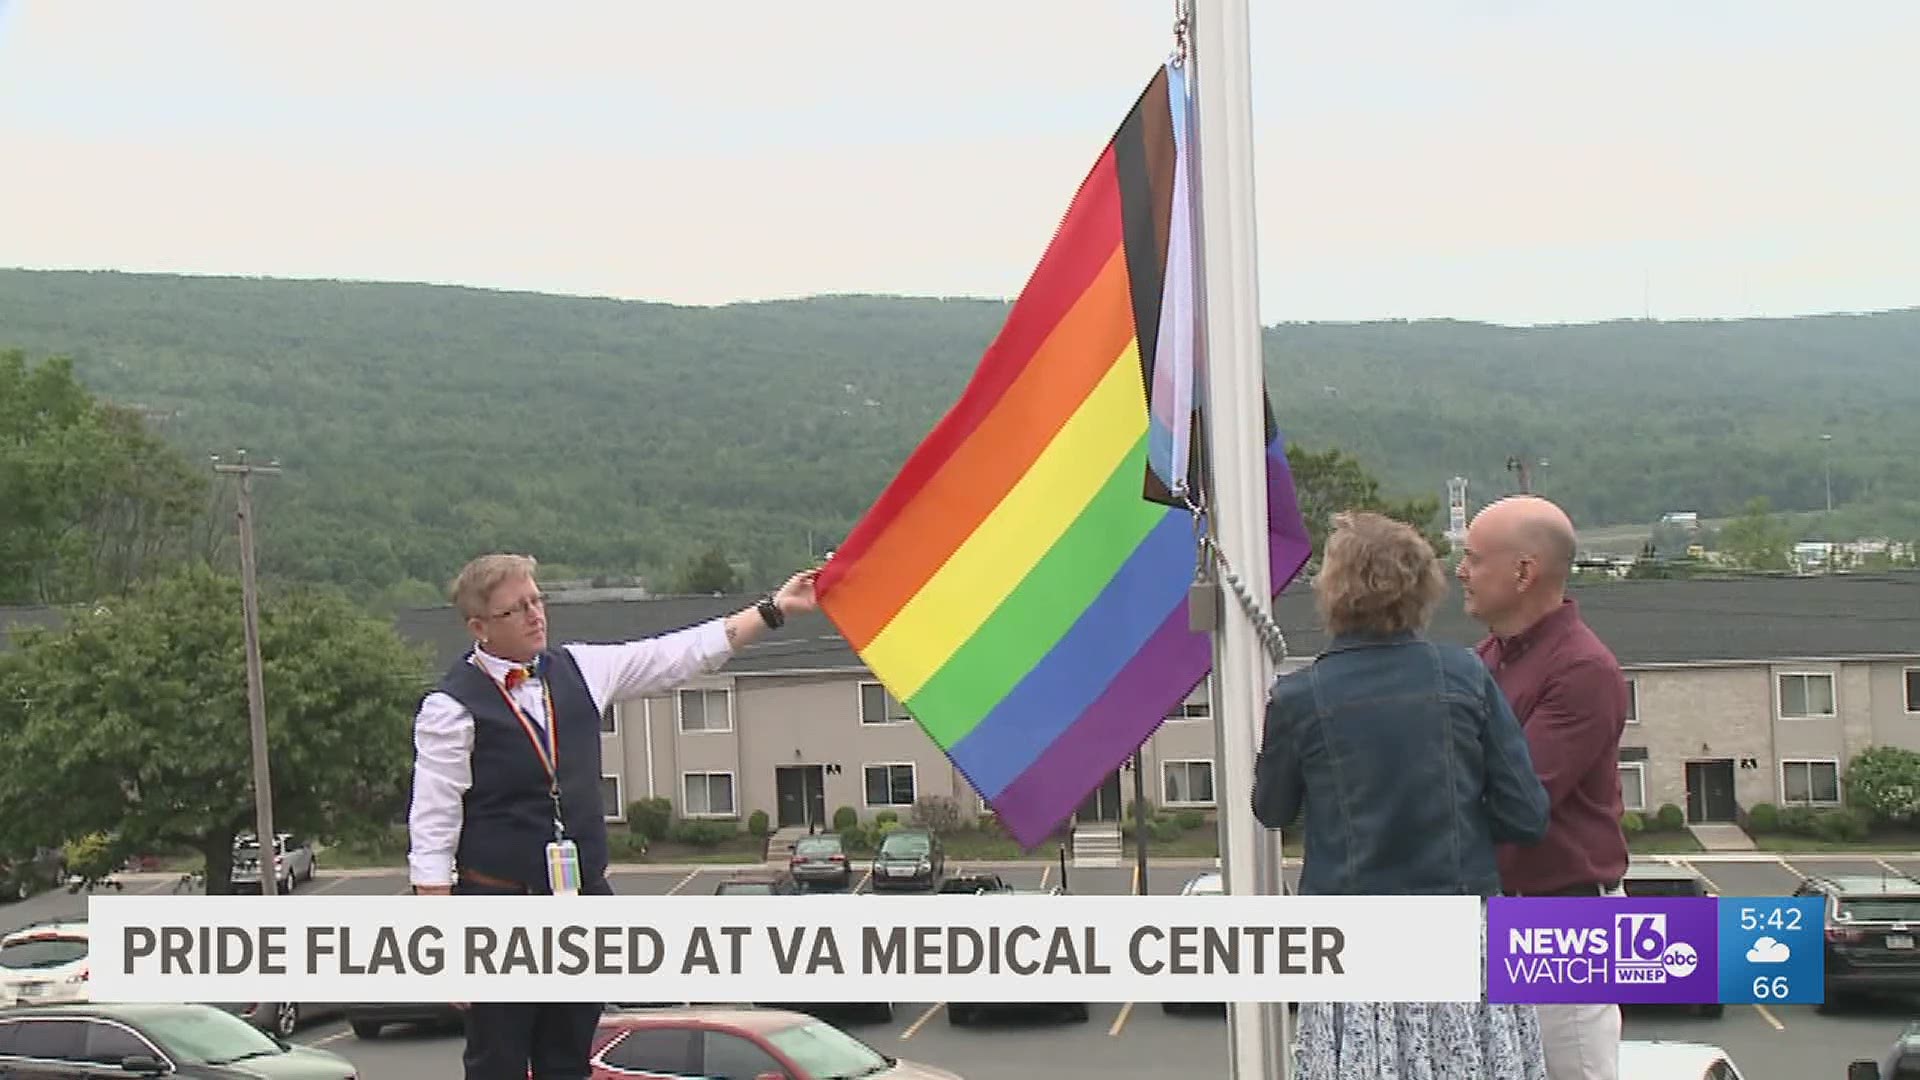 For the first time, the VA Medical Center near Wilkes-Barre raised a pride flag on Wednesday.